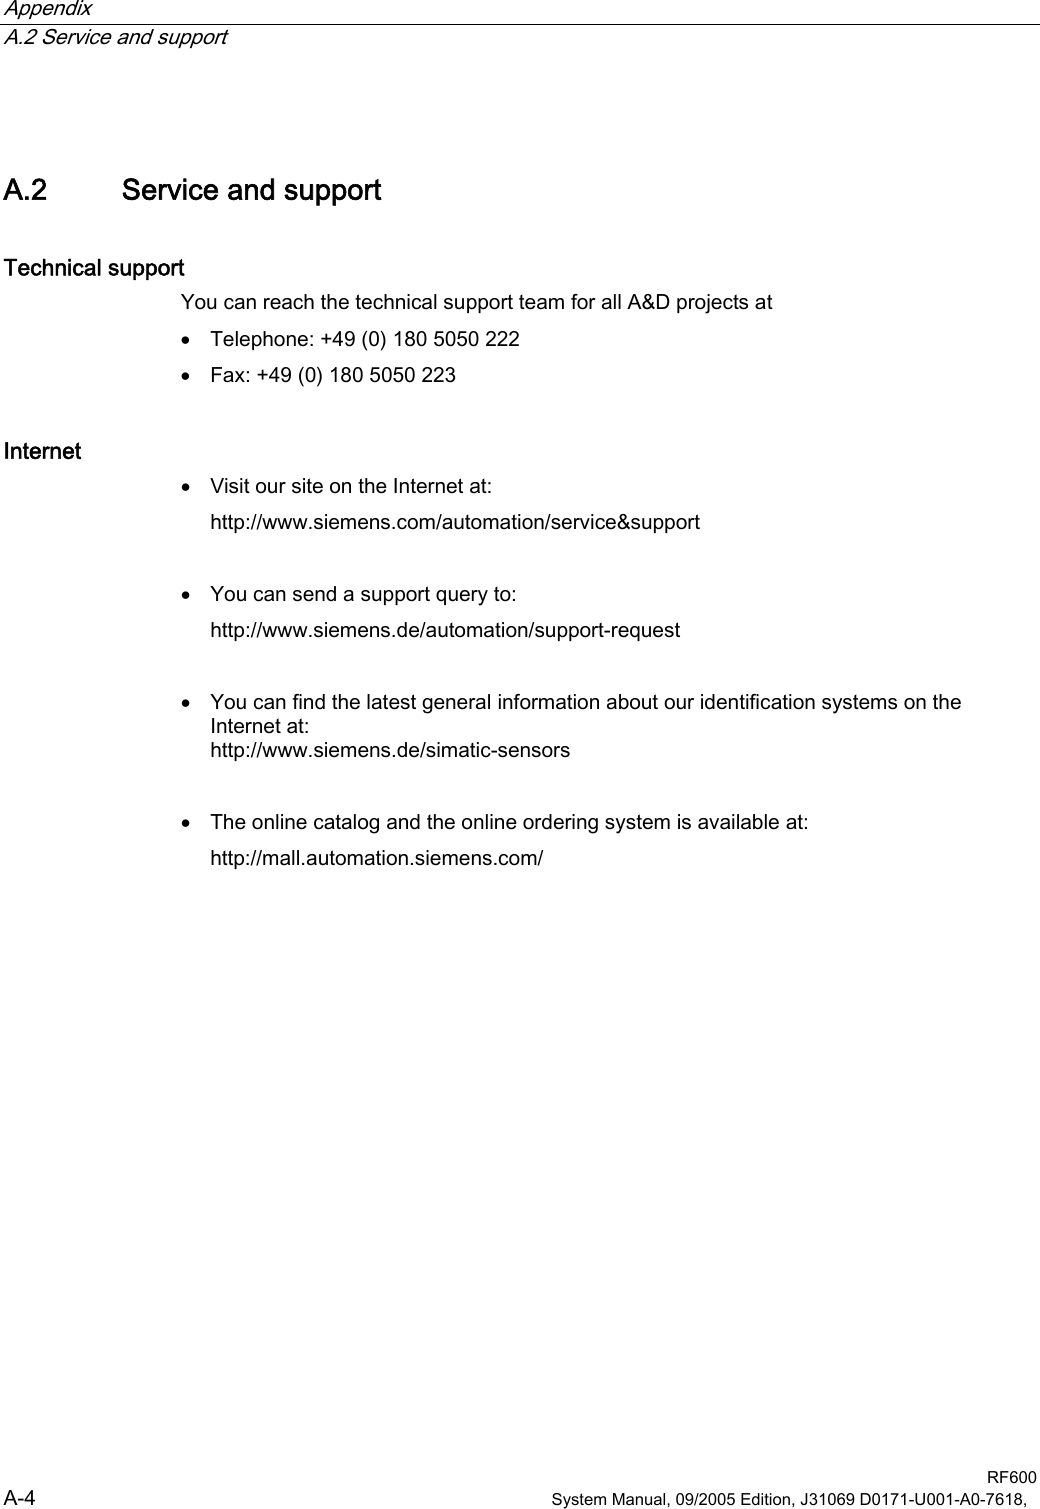 Appendix   A.2 Service and support  RF600 A-4  System Manual, 09/2005 Edition, J31069 D0171-U001-A0-7618,   A.2 Service and support Technical support You can reach the technical support team for all A&amp;D projects at • Telephone: +49 (0) 180 5050 222 • Fax: +49 (0) 180 5050 223 Internet • Visit our site on the Internet at: http://www.siemens.com/automation/service&amp;support  • You can send a support query to: http://www.siemens.de/automation/support-request  • You can find the latest general information about our identification systems on the Internet at: http://www.siemens.de/simatic-sensors  • The online catalog and the online ordering system is available at: http://mall.automation.siemens.com/ 